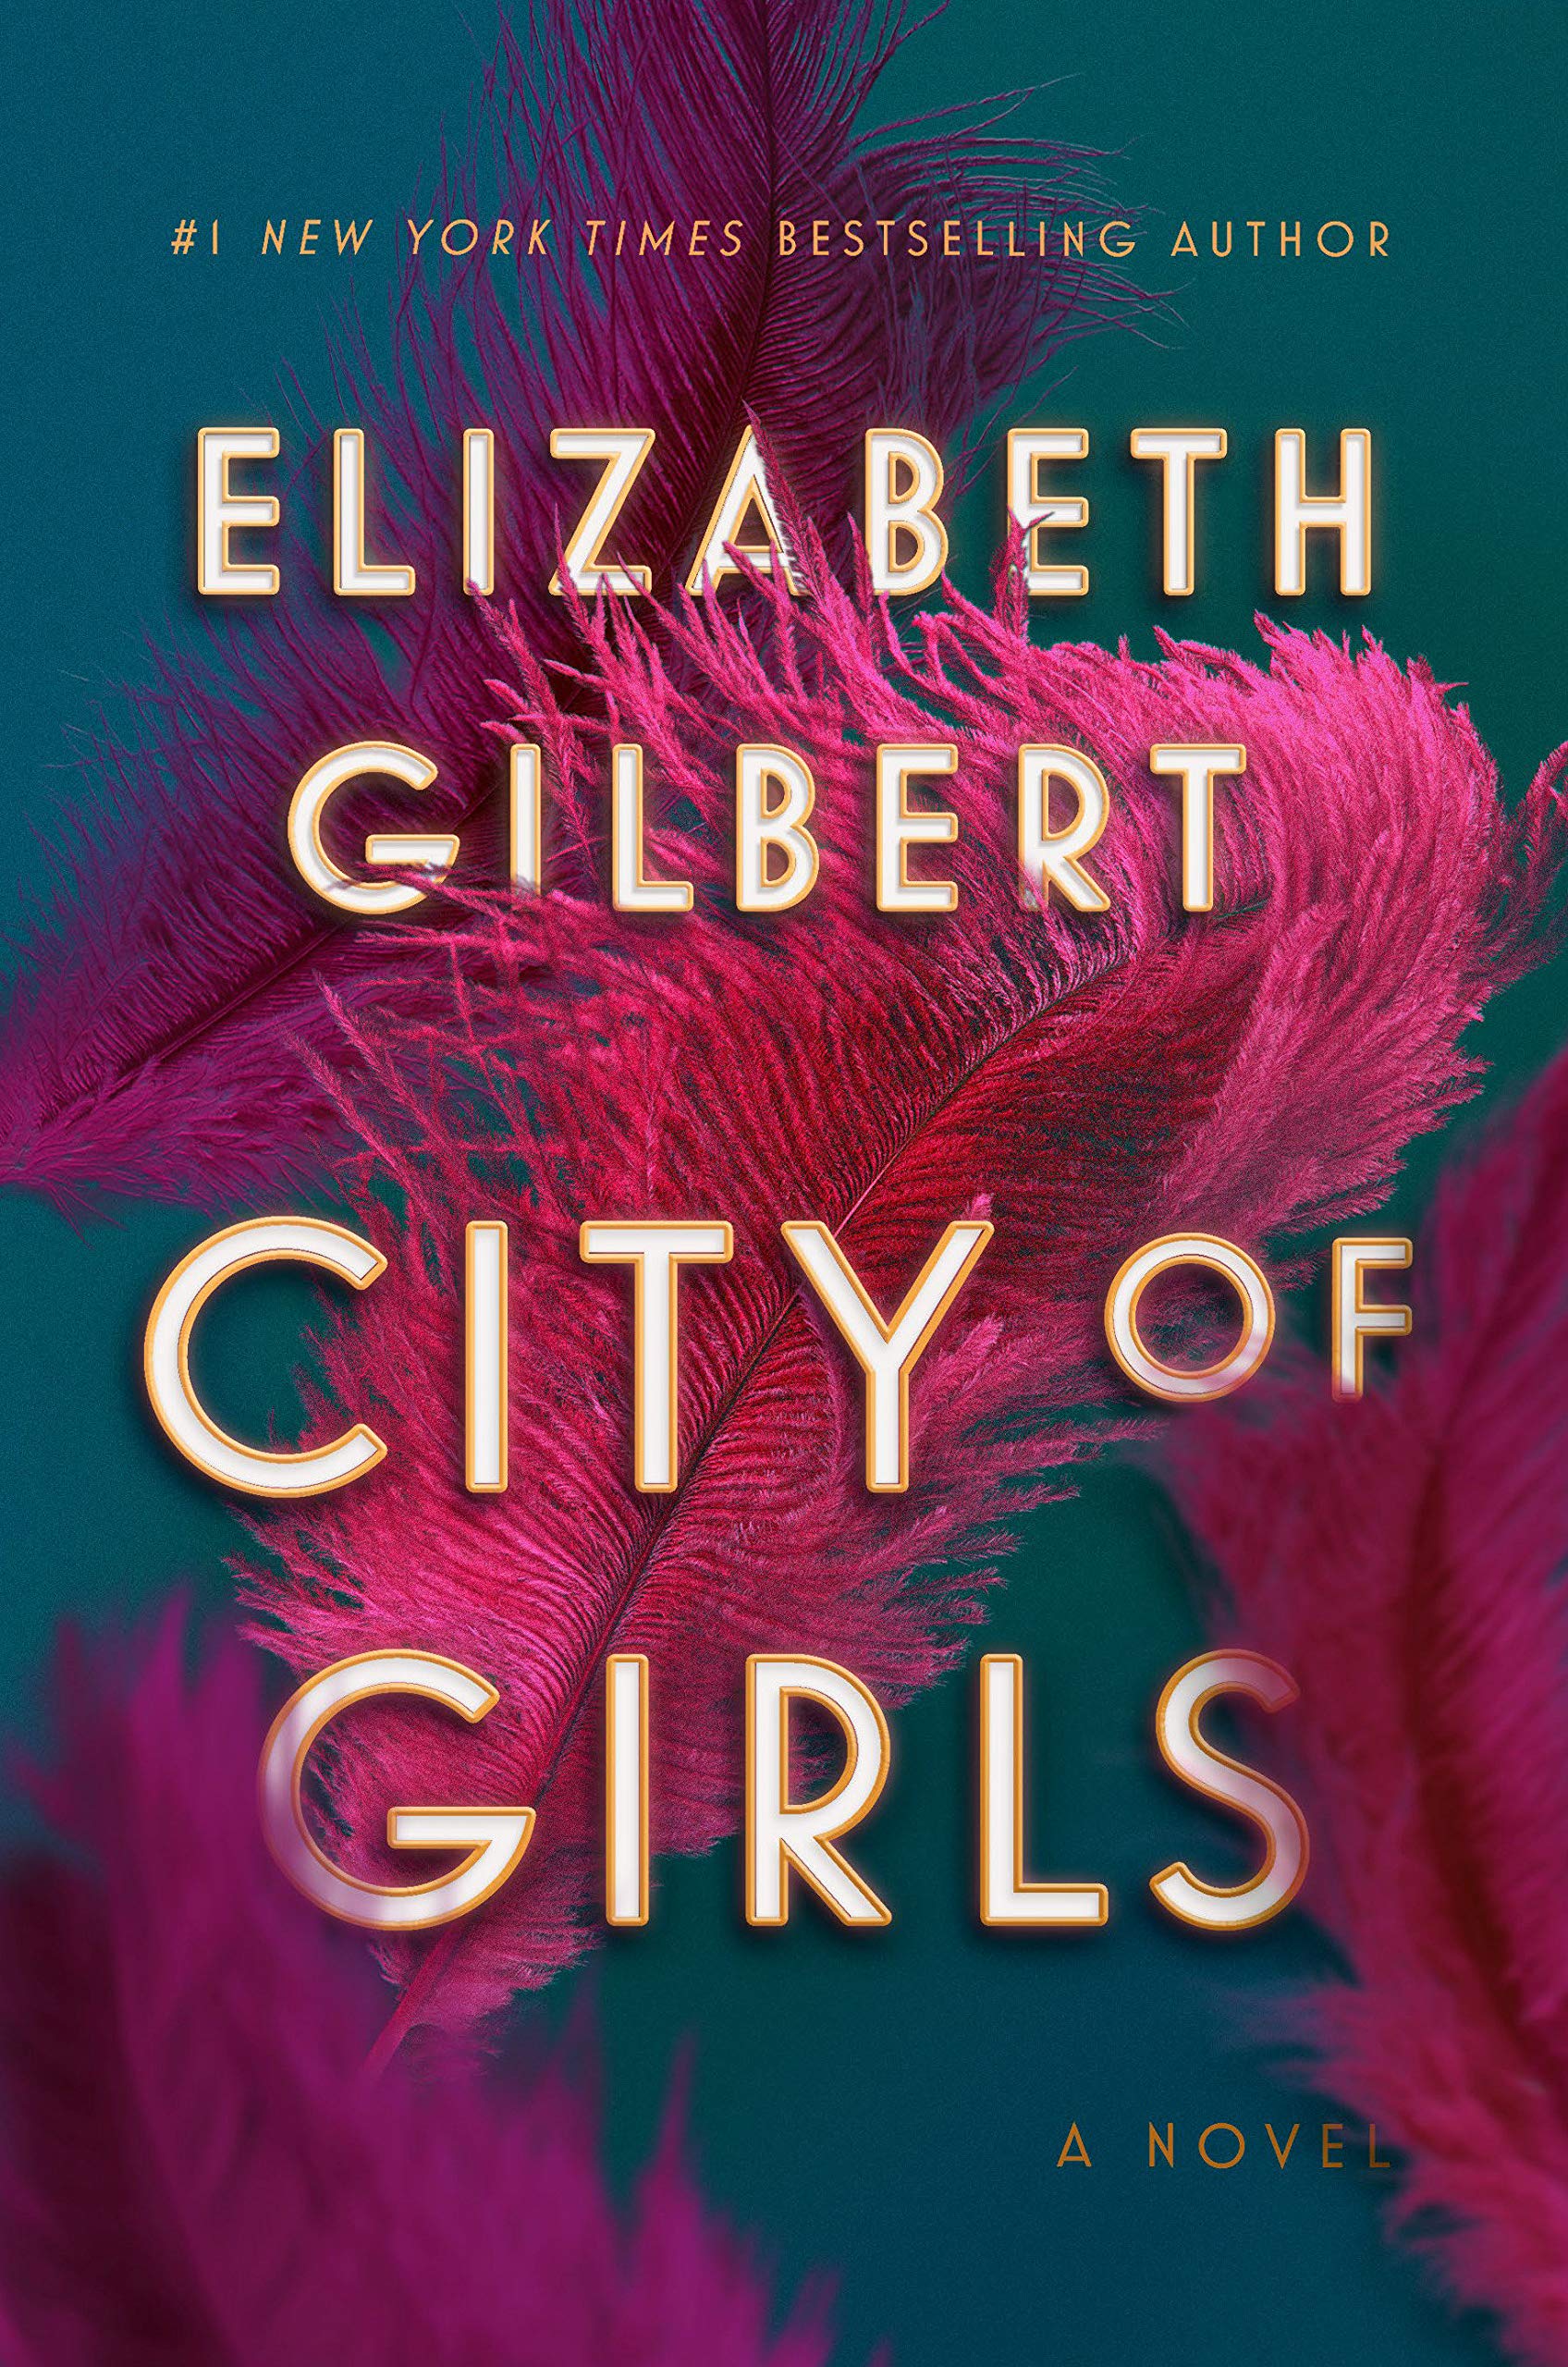 Great new books by diverse women authors: City of Girls by Elizabeth Gilbert